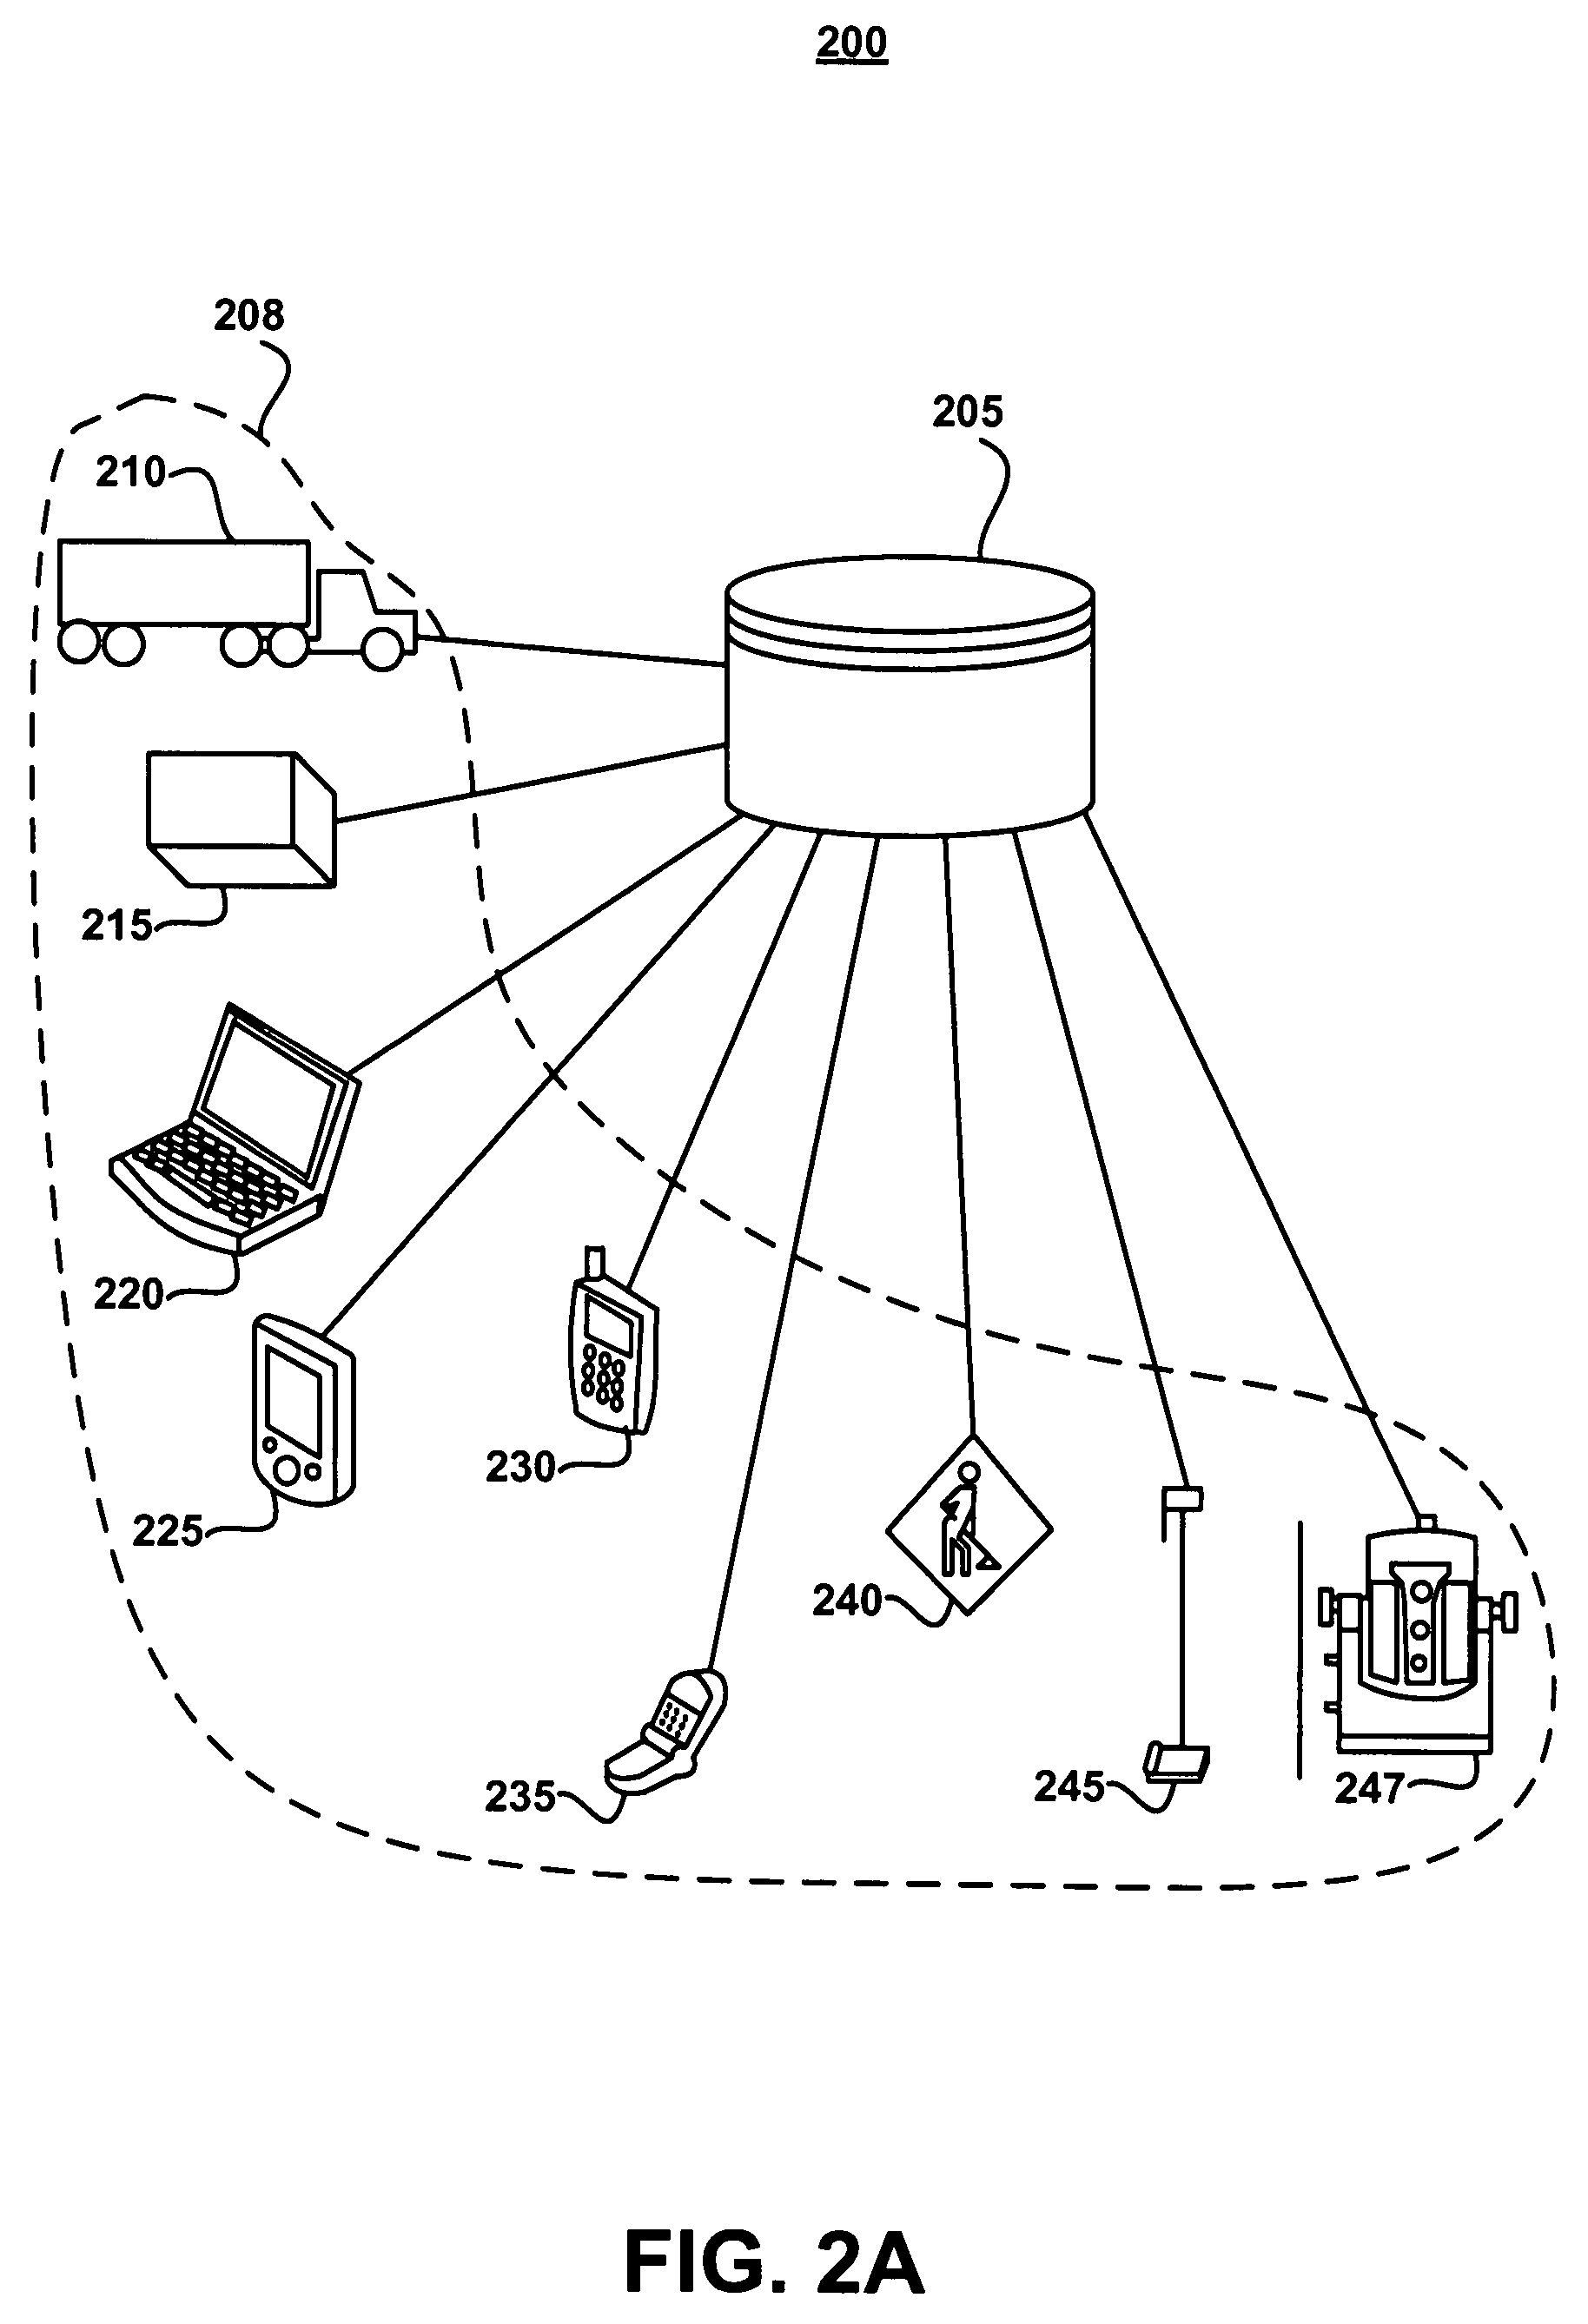 Method for providing maintenance to an asset